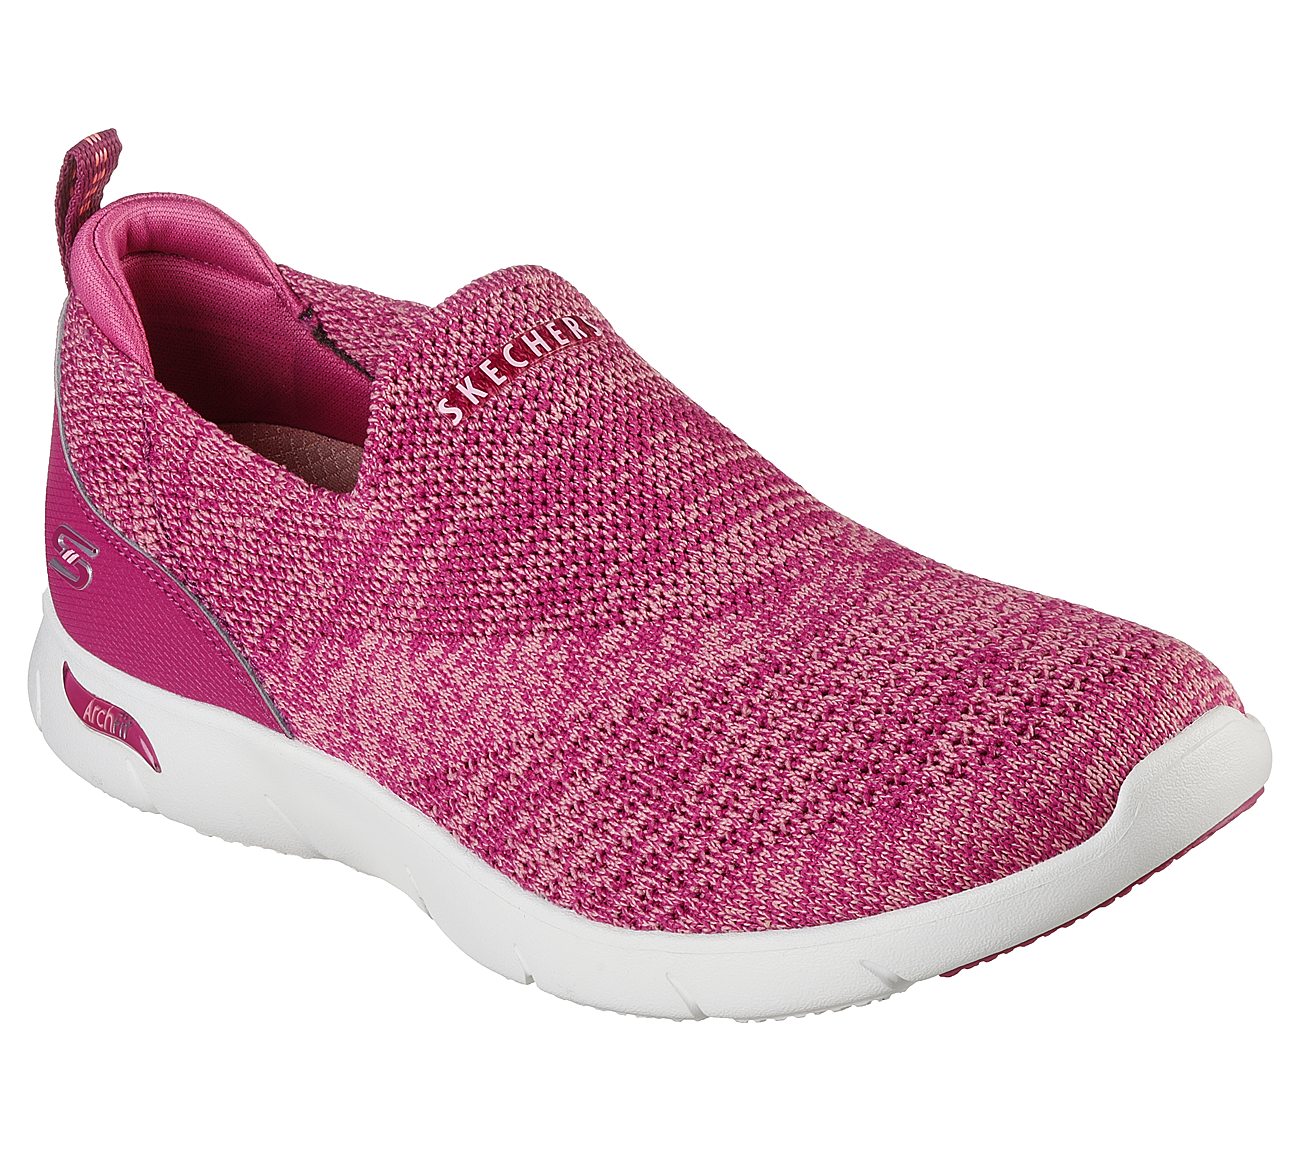 ARCH FIT REFINE - DON'T GO, RASPBERRY Footwear Lateral View